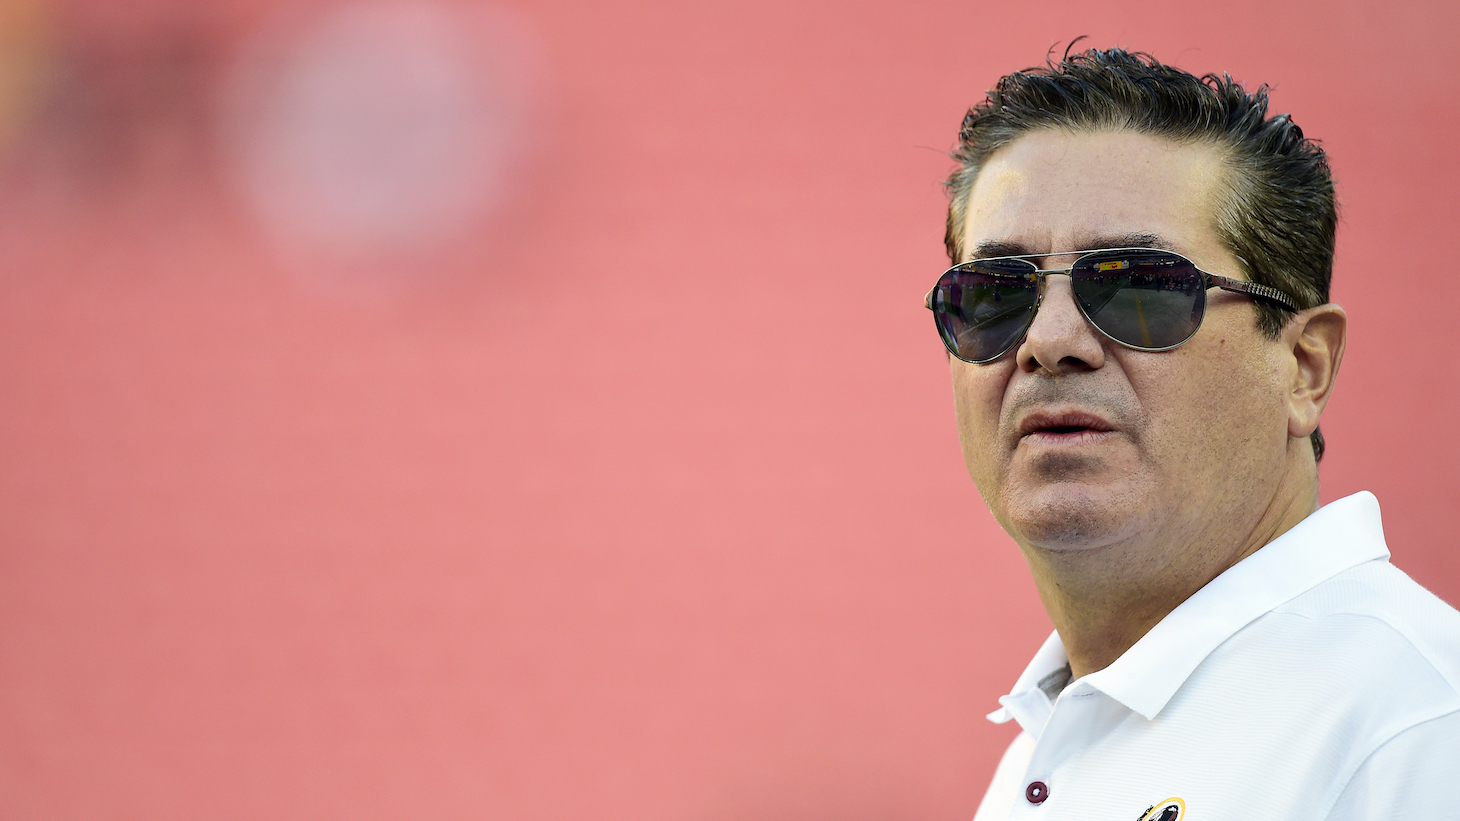 LANDOVER, MD - AUGUST 29: Washington Redskins owner Dan Snyder stands on the field before a preseason game between the Baltimore Ravens and Redskins at FedExField on August 29, 2019 in Landover, Maryland. (Photo by Patrick McDermott/Getty Images)